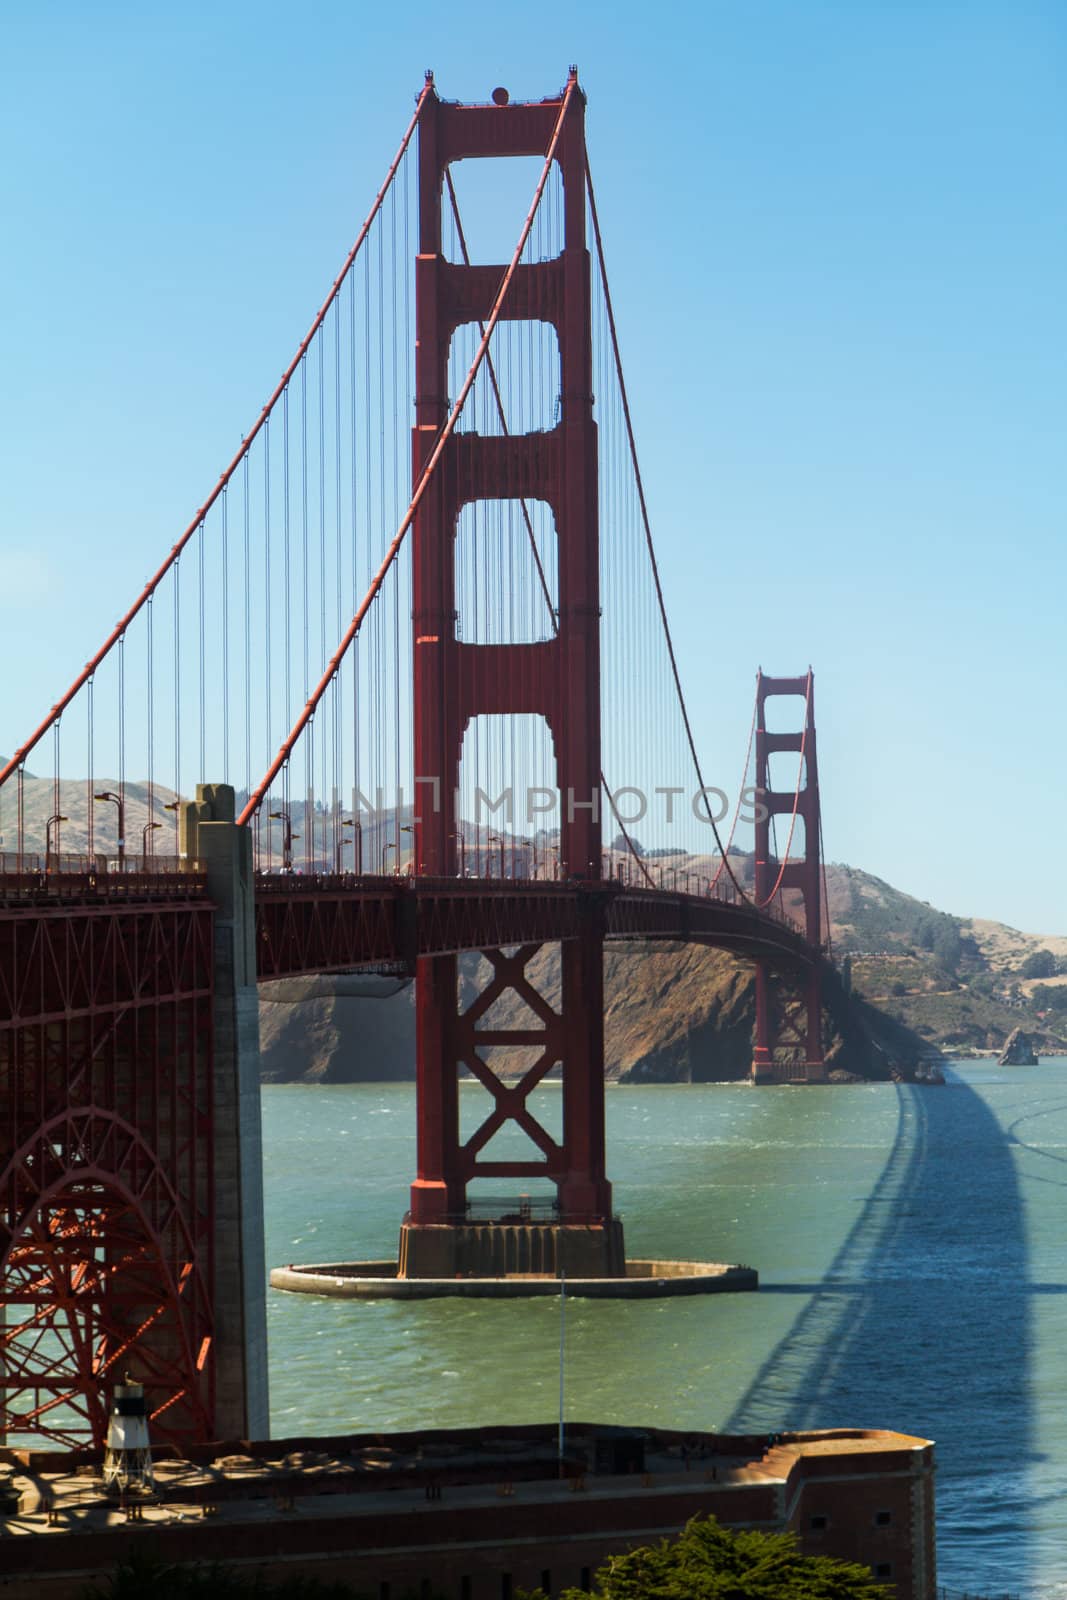 The Golden Gate Bridge is a suspension bridge spanning the Golden Gate, the opening of the San Francisco Bay into the Pacific Ocean. It is one of the most internationally recognized symbols of San Francisco, California.